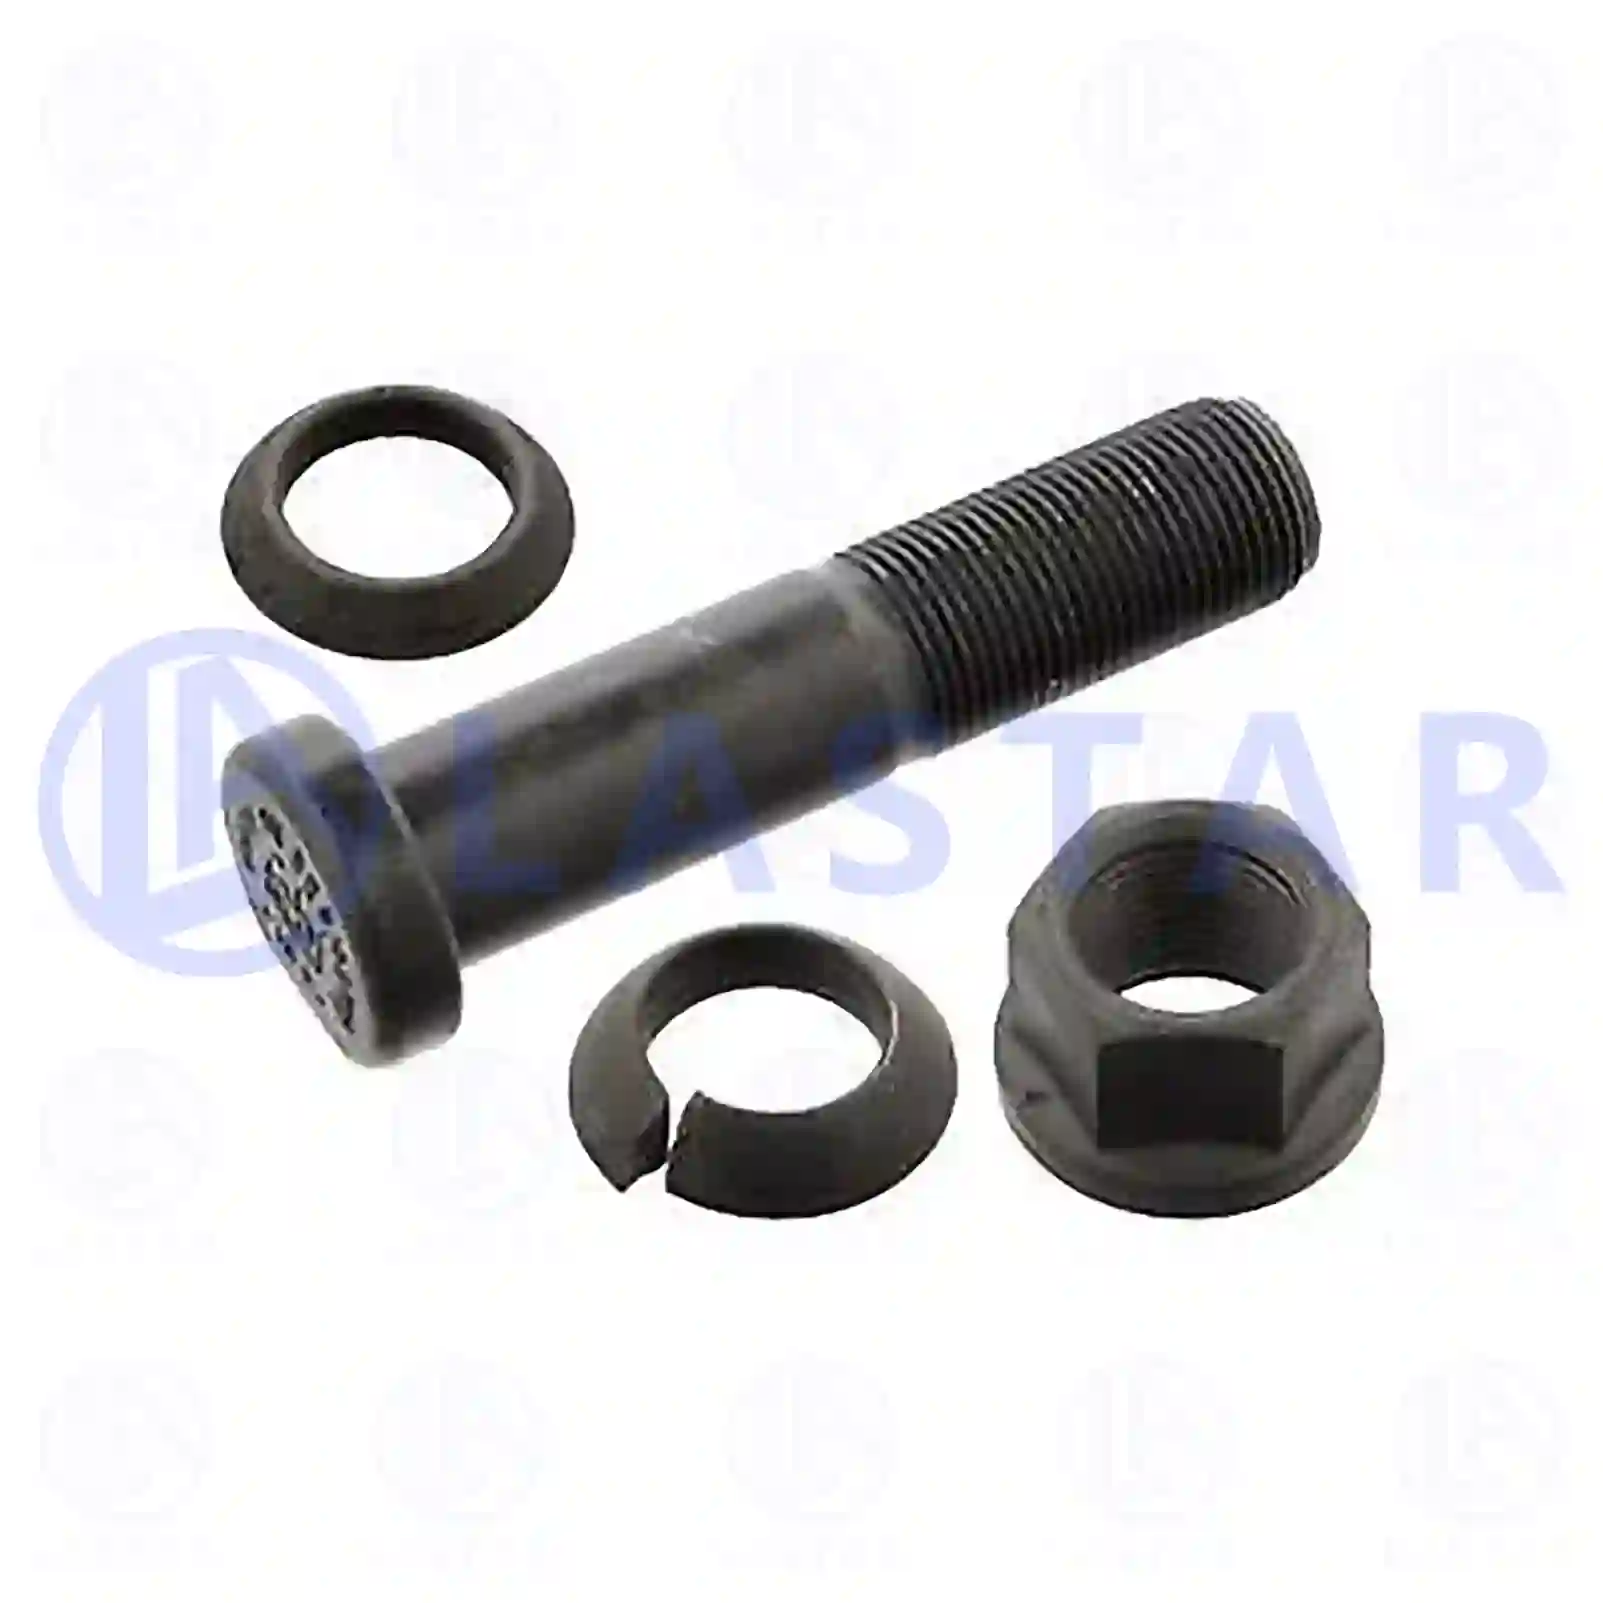 Wheel bolt, complete, 77726425, 3274020371S, , , , ||  77726425 Lastar Spare Part | Truck Spare Parts, Auotomotive Spare Parts Wheel bolt, complete, 77726425, 3274020371S, , , , ||  77726425 Lastar Spare Part | Truck Spare Parts, Auotomotive Spare Parts